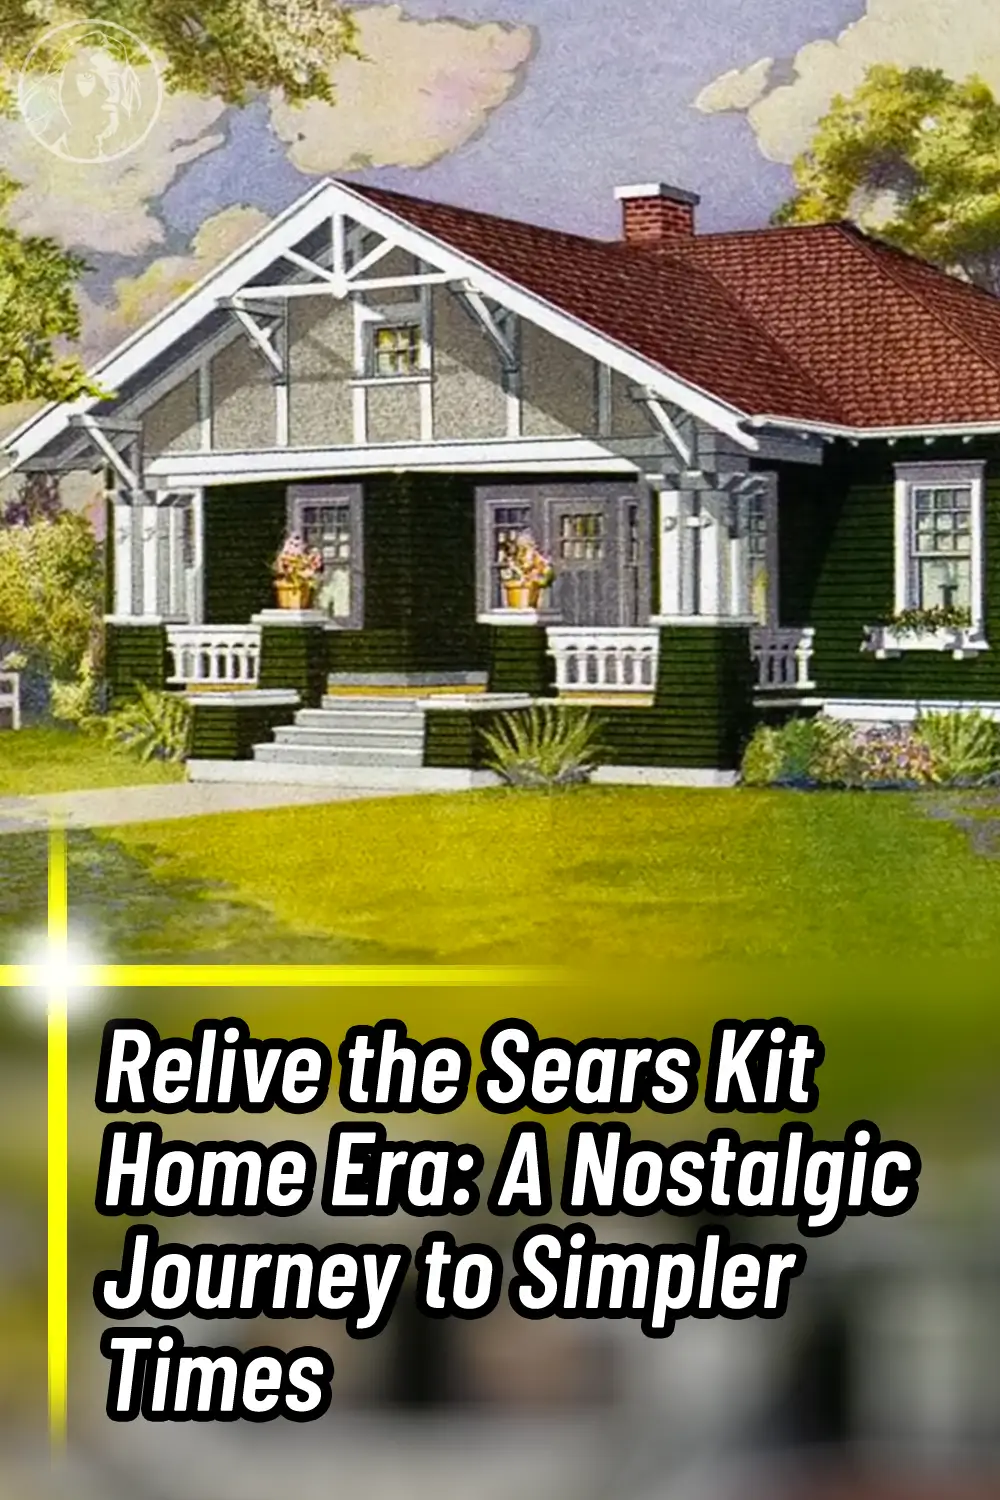 Relive the Sears Kit Home Era: A Nostalgic Journey to Simpler Times